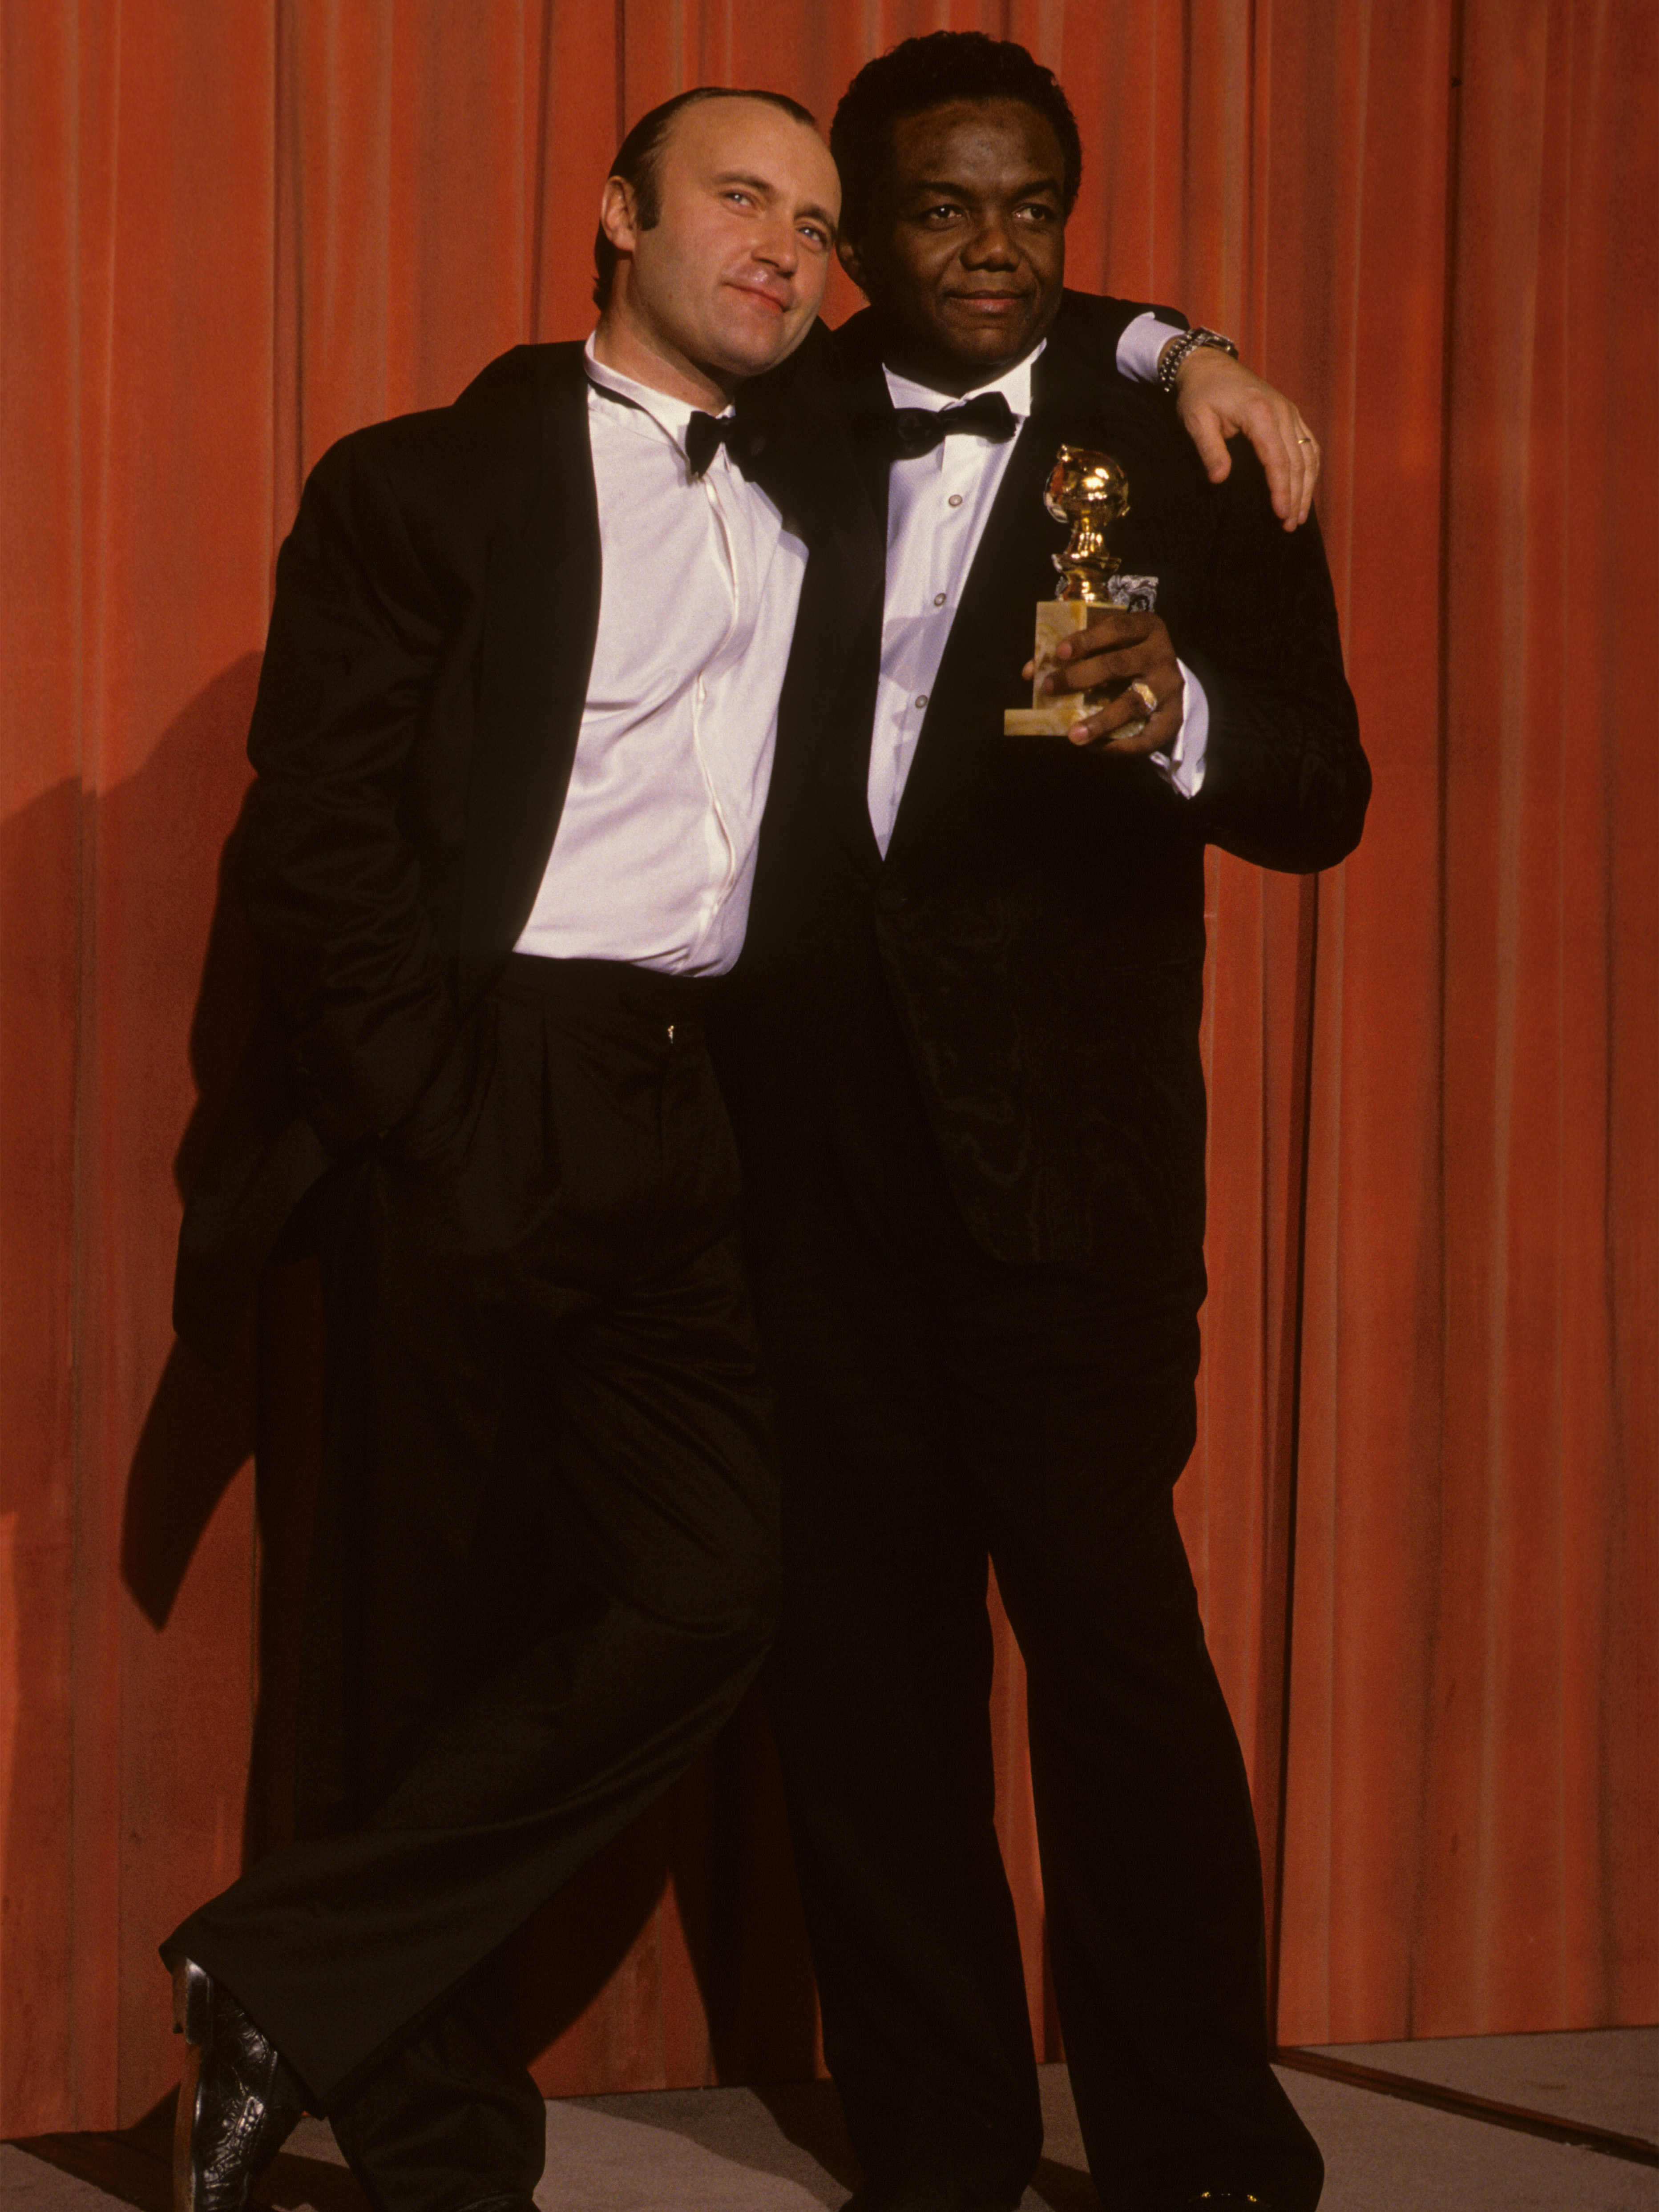 1989 Phil Collins and Lamont Dozier, 46th Golden Globes